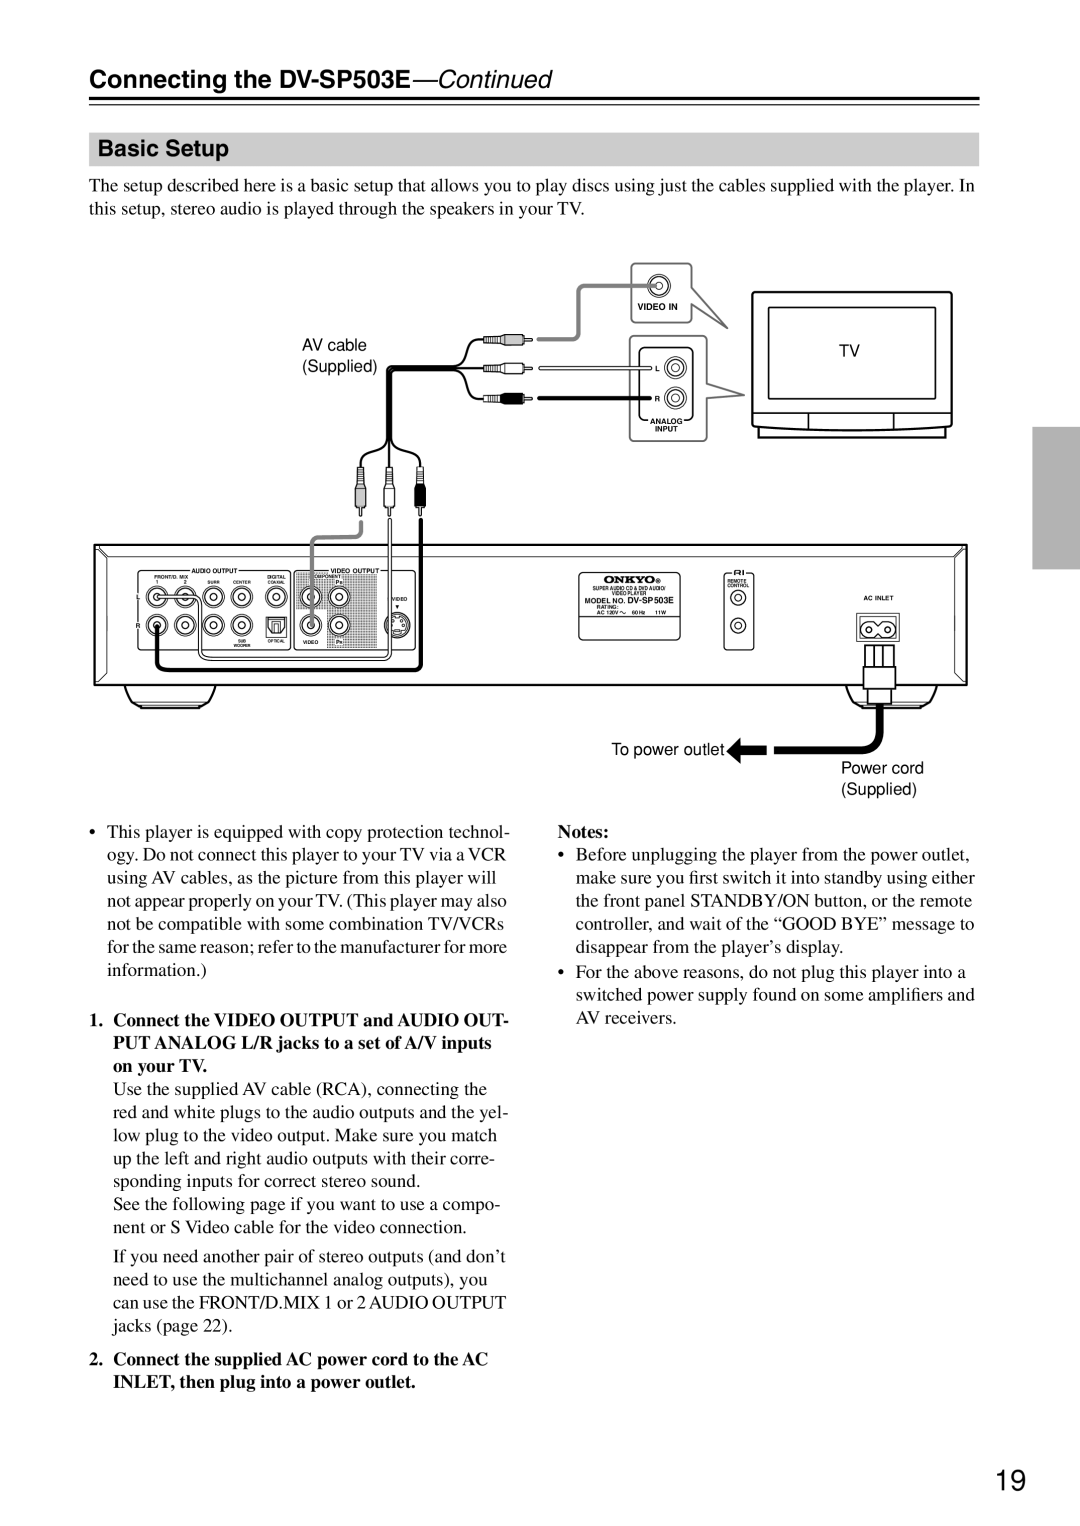 Onkyo instruction manual Connecting the DV-SP503E-Continued, Basic Setup 